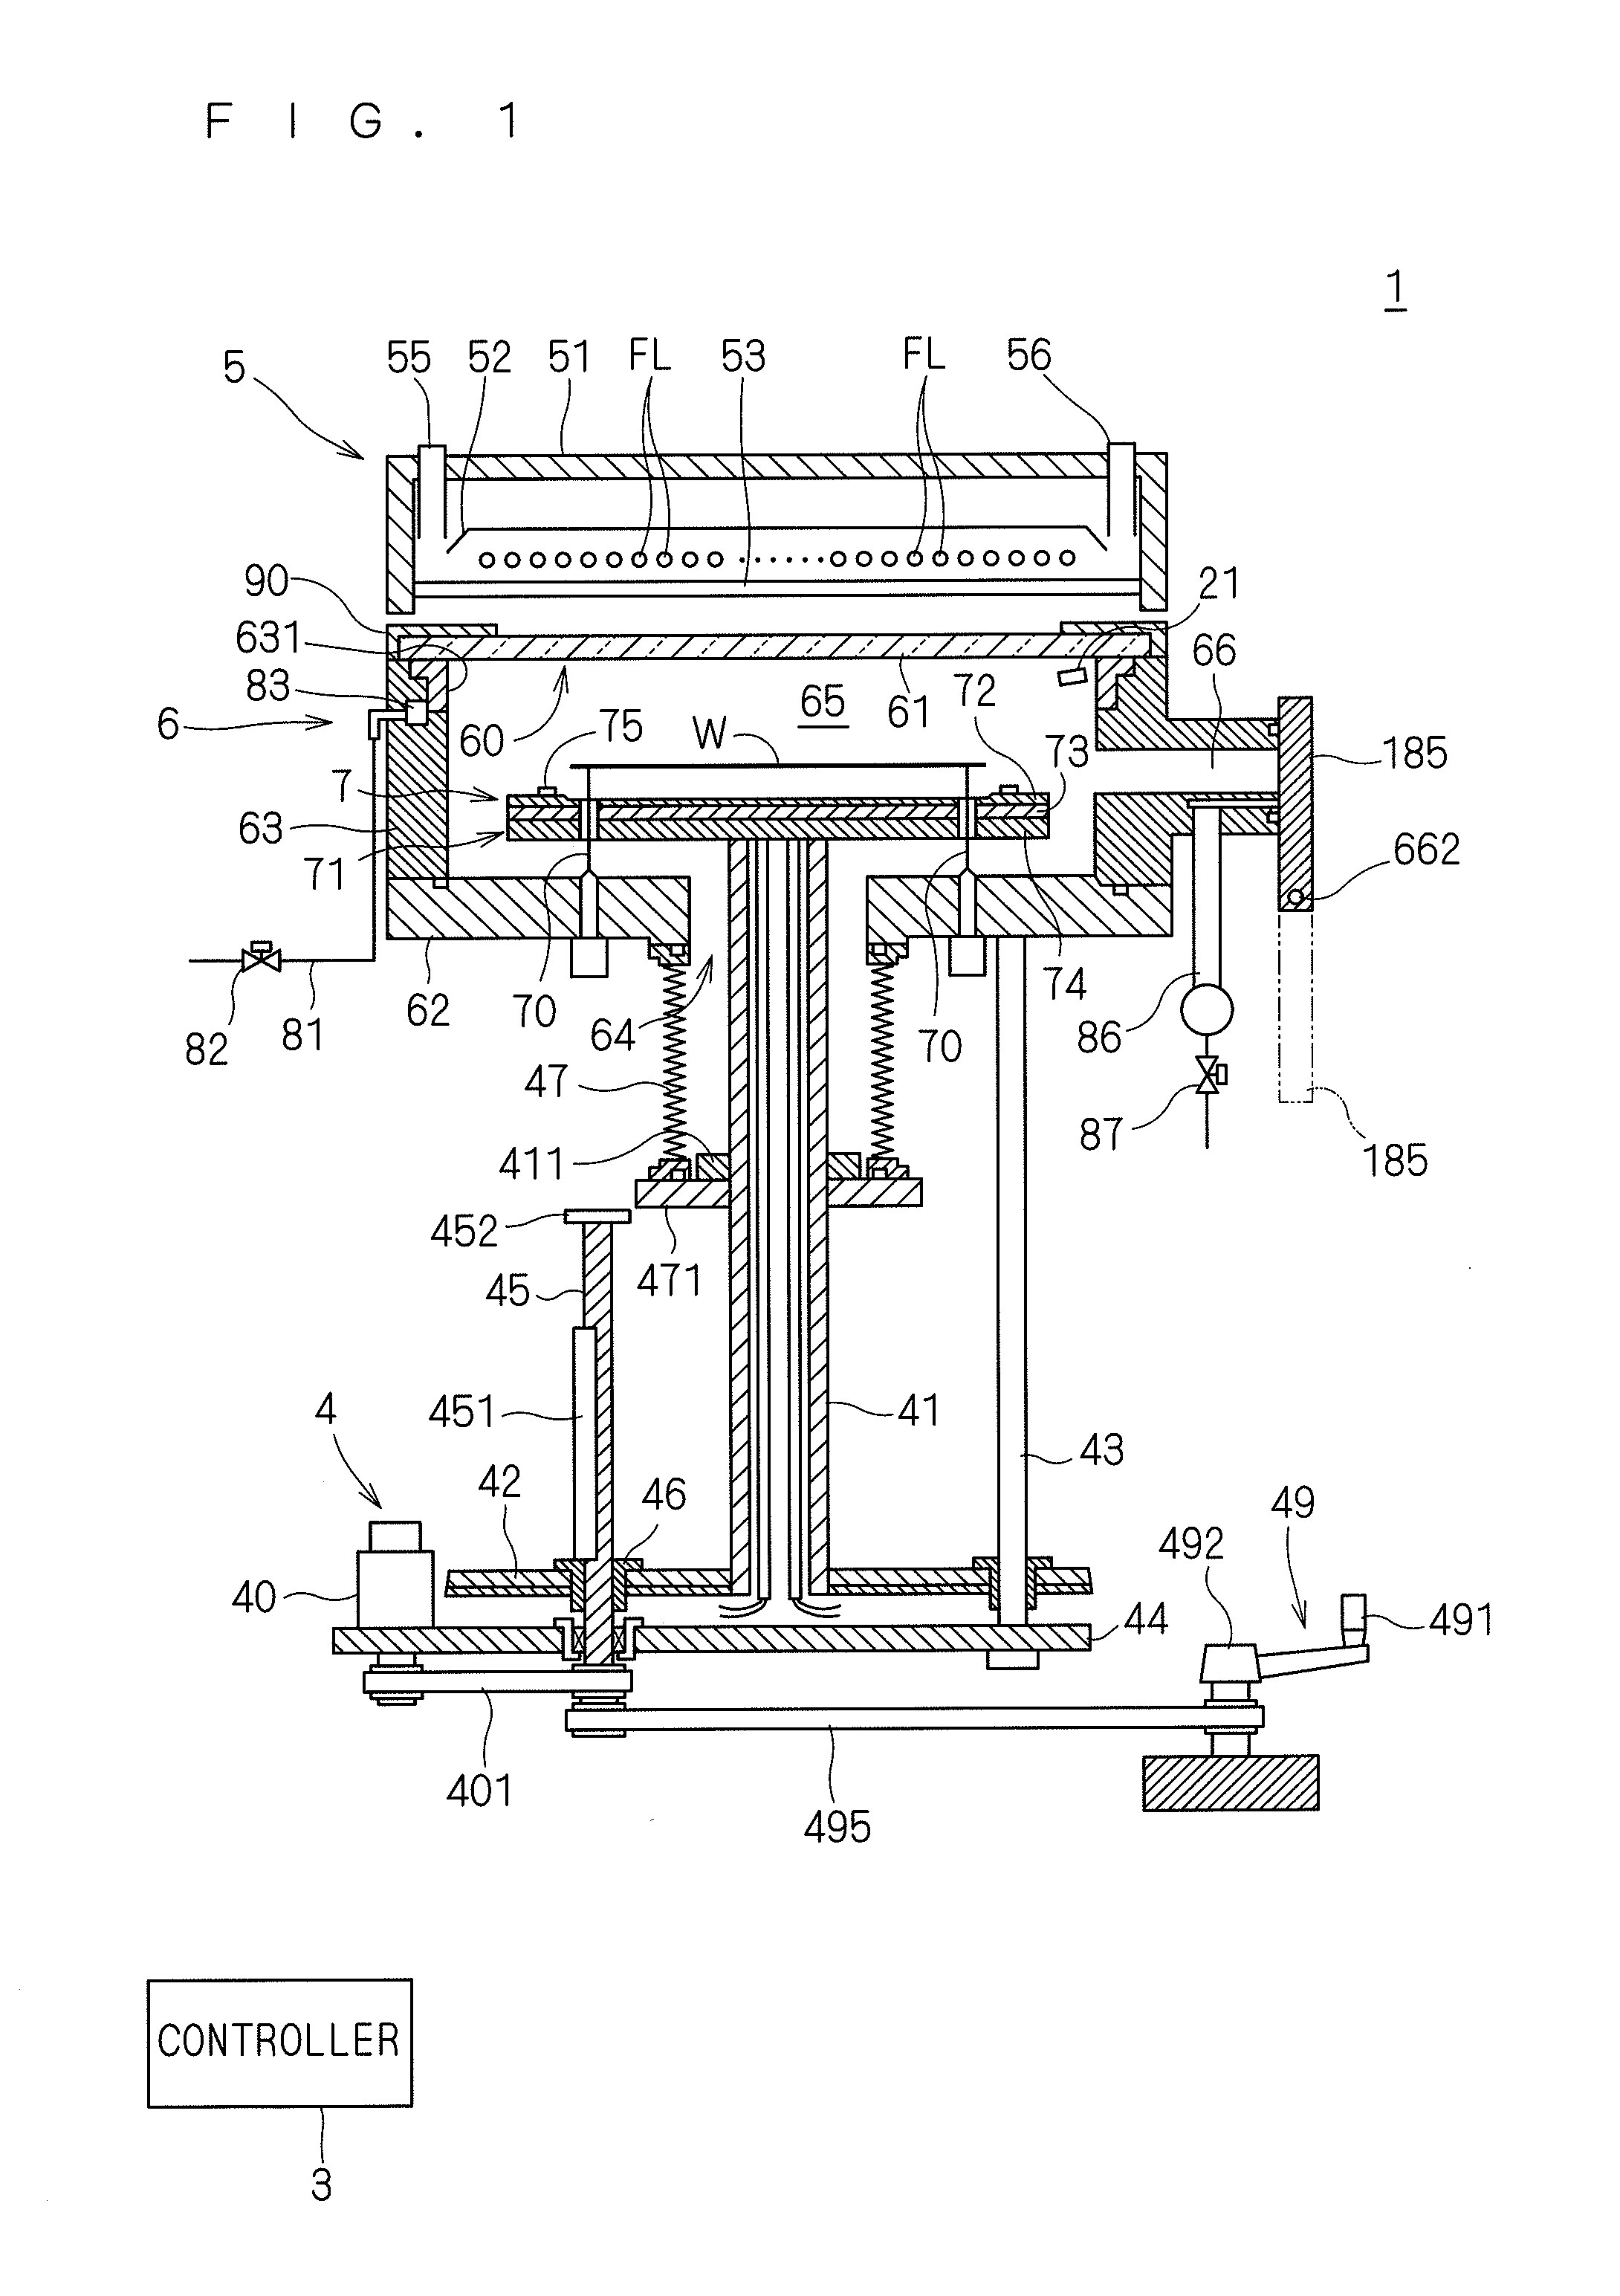 Heat treatment apparatus and heat treatment method for heating substrate by irradiating substrate with flashes of light